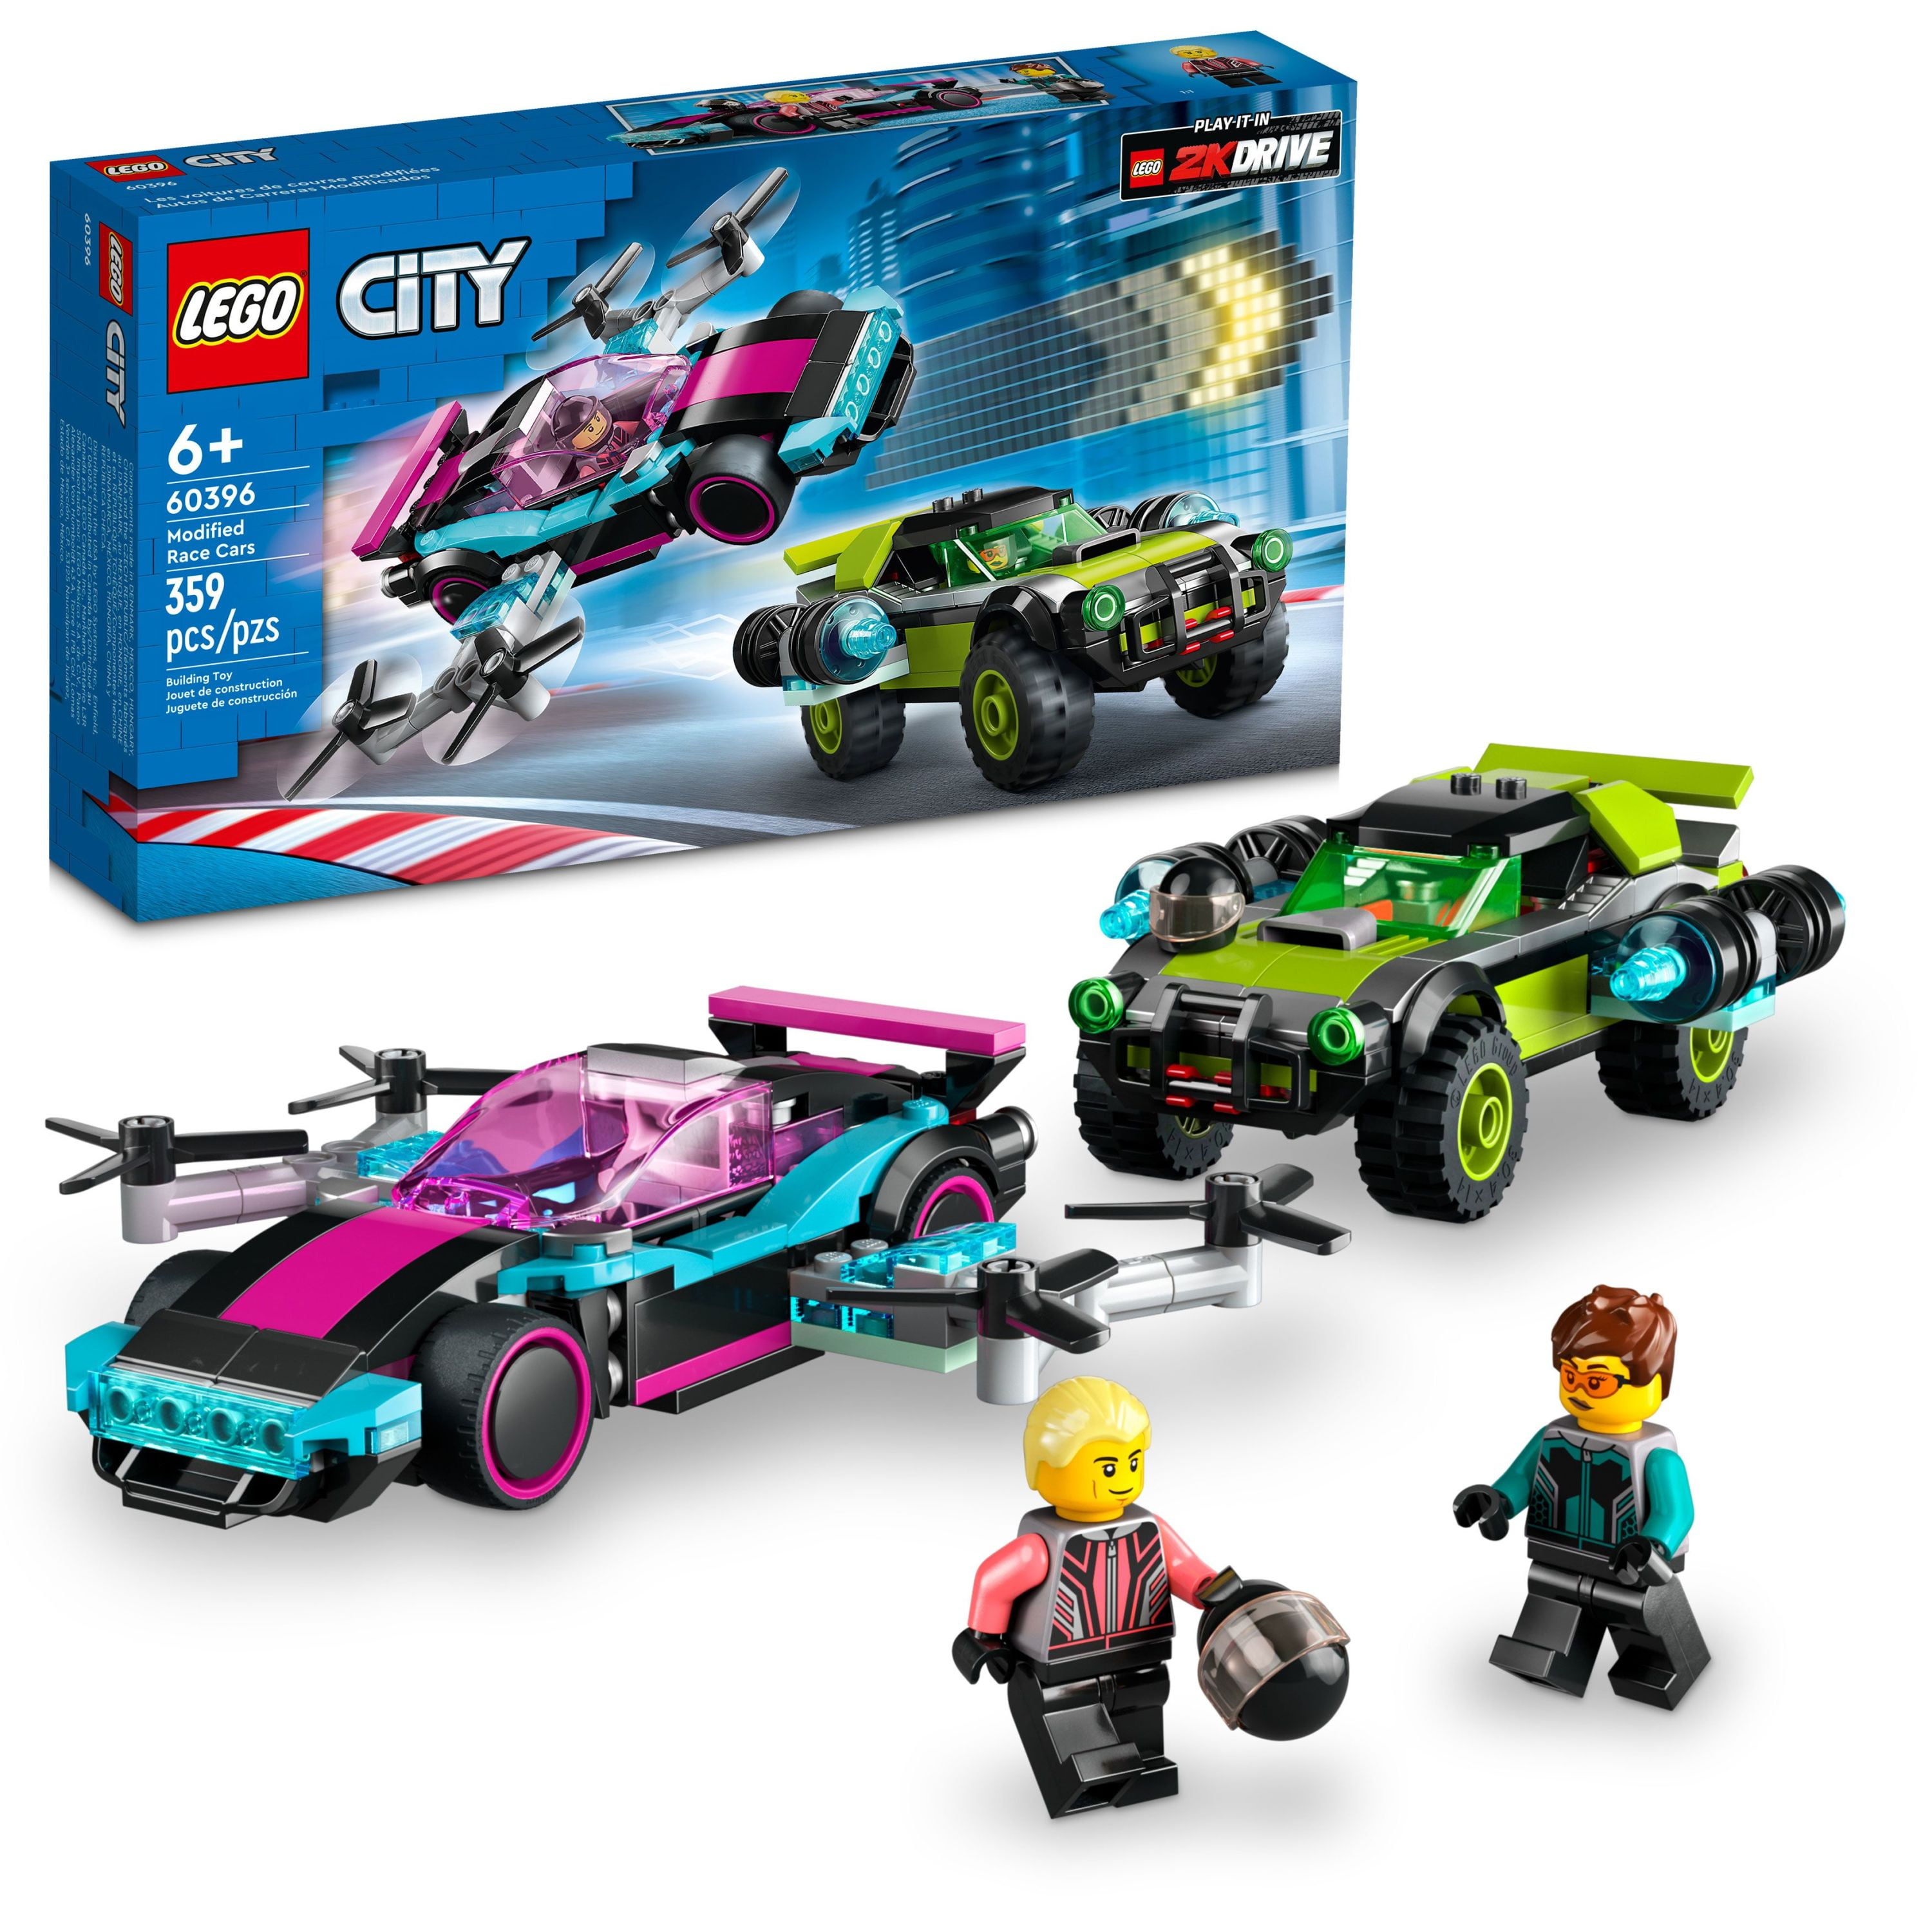 LEGO City Modified Race Cars 60396 Toy Car Building Set, Includes